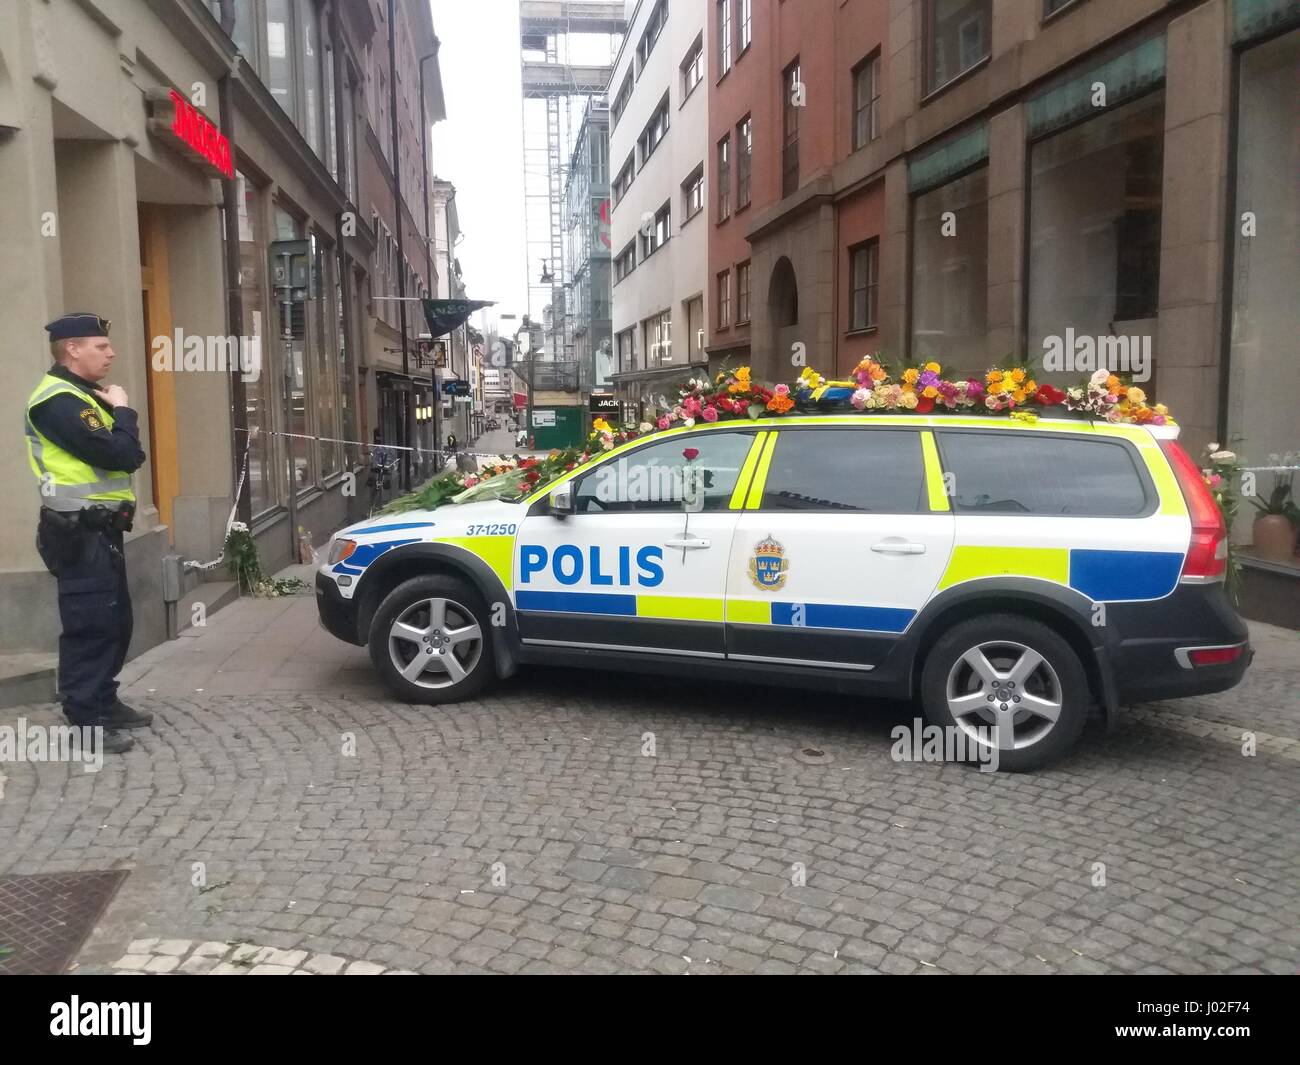 Swedish Polis policeman standing sideways to a police car parked in a central street in Stockholm, covered by a pile of hundreds of flower bouquets, symbolising the generous Swedish sympathy and mourn for the lost lives of their compatriots, after the terrorist attack led by man driving a truck in high speed, slamming into pedestrians around Ahlens shopping centre. One man has been arrested insofar, after a manhunt  for the suspected attacker who left 4 dead and 16 injured civilians behind his actions. Stock Photo